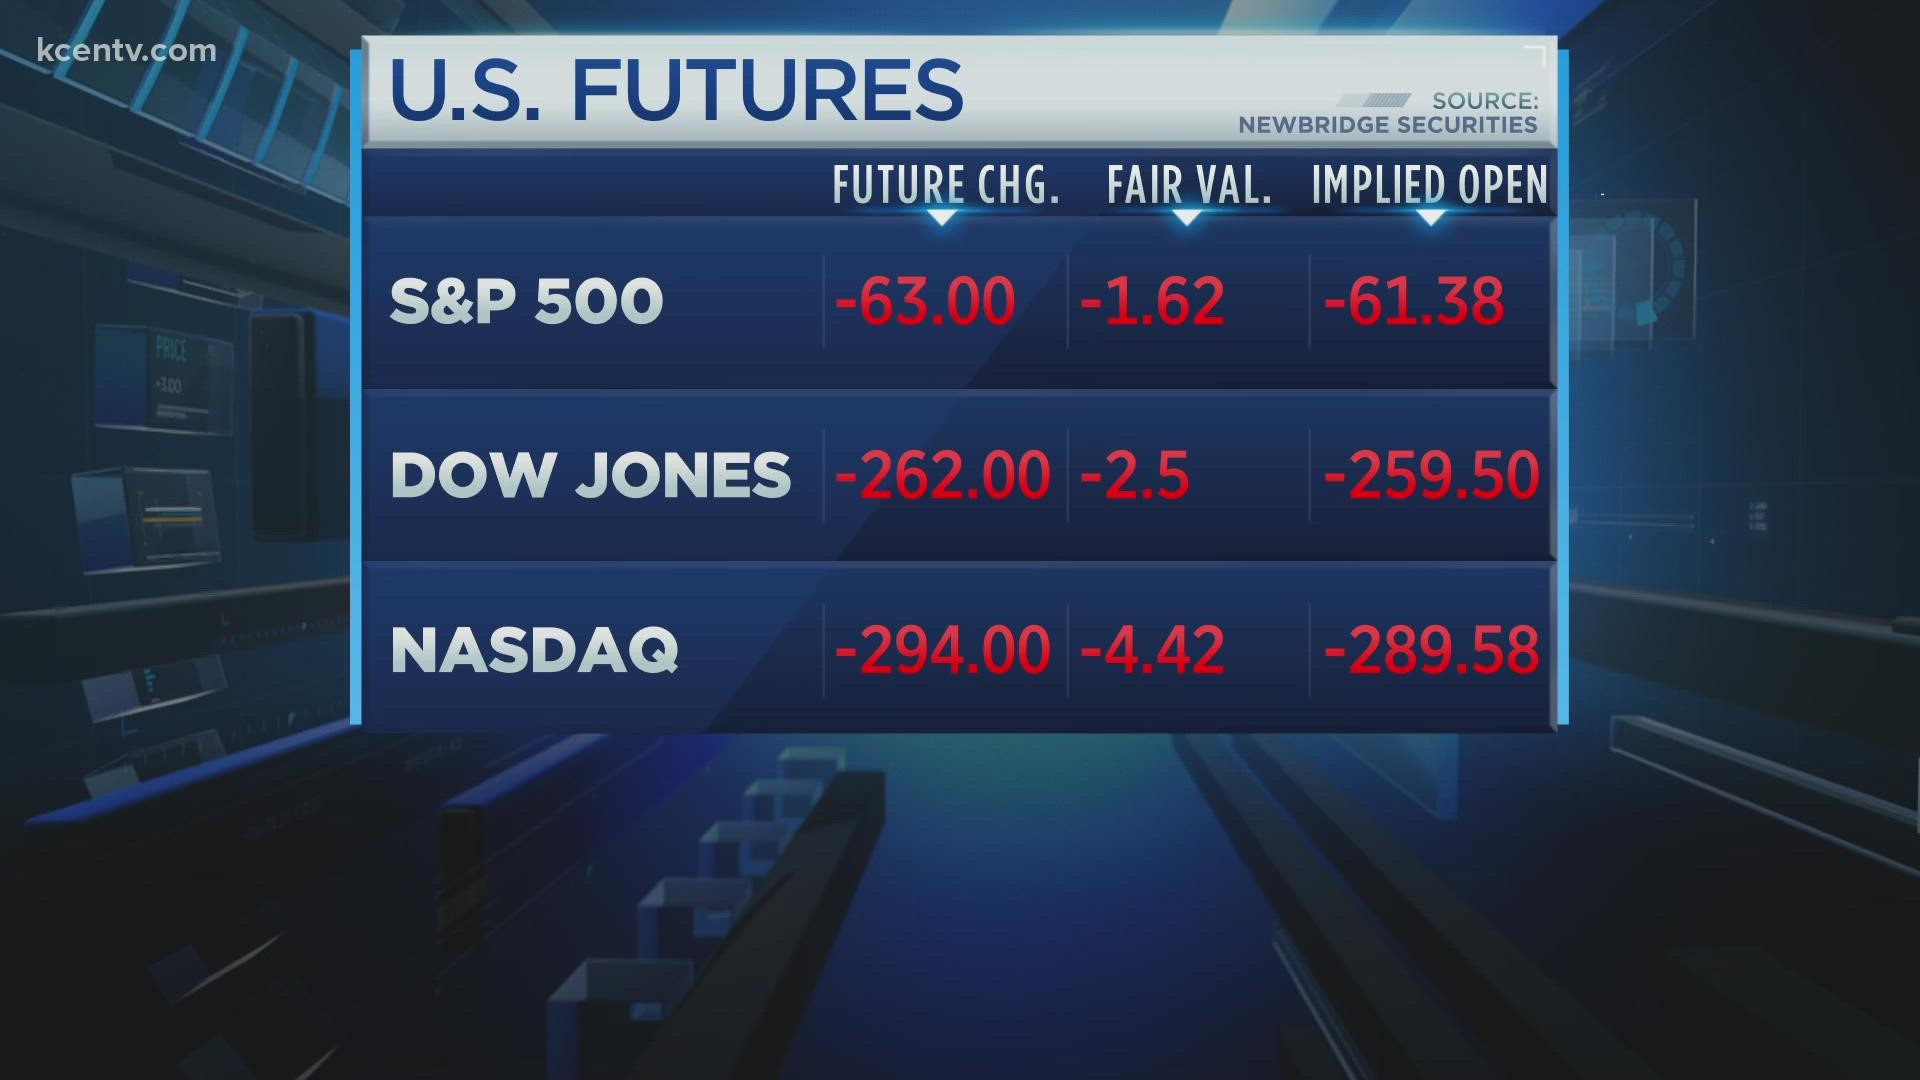 The U.S. market rallied Monday, but it's unclear if there is another downward trend on its way.